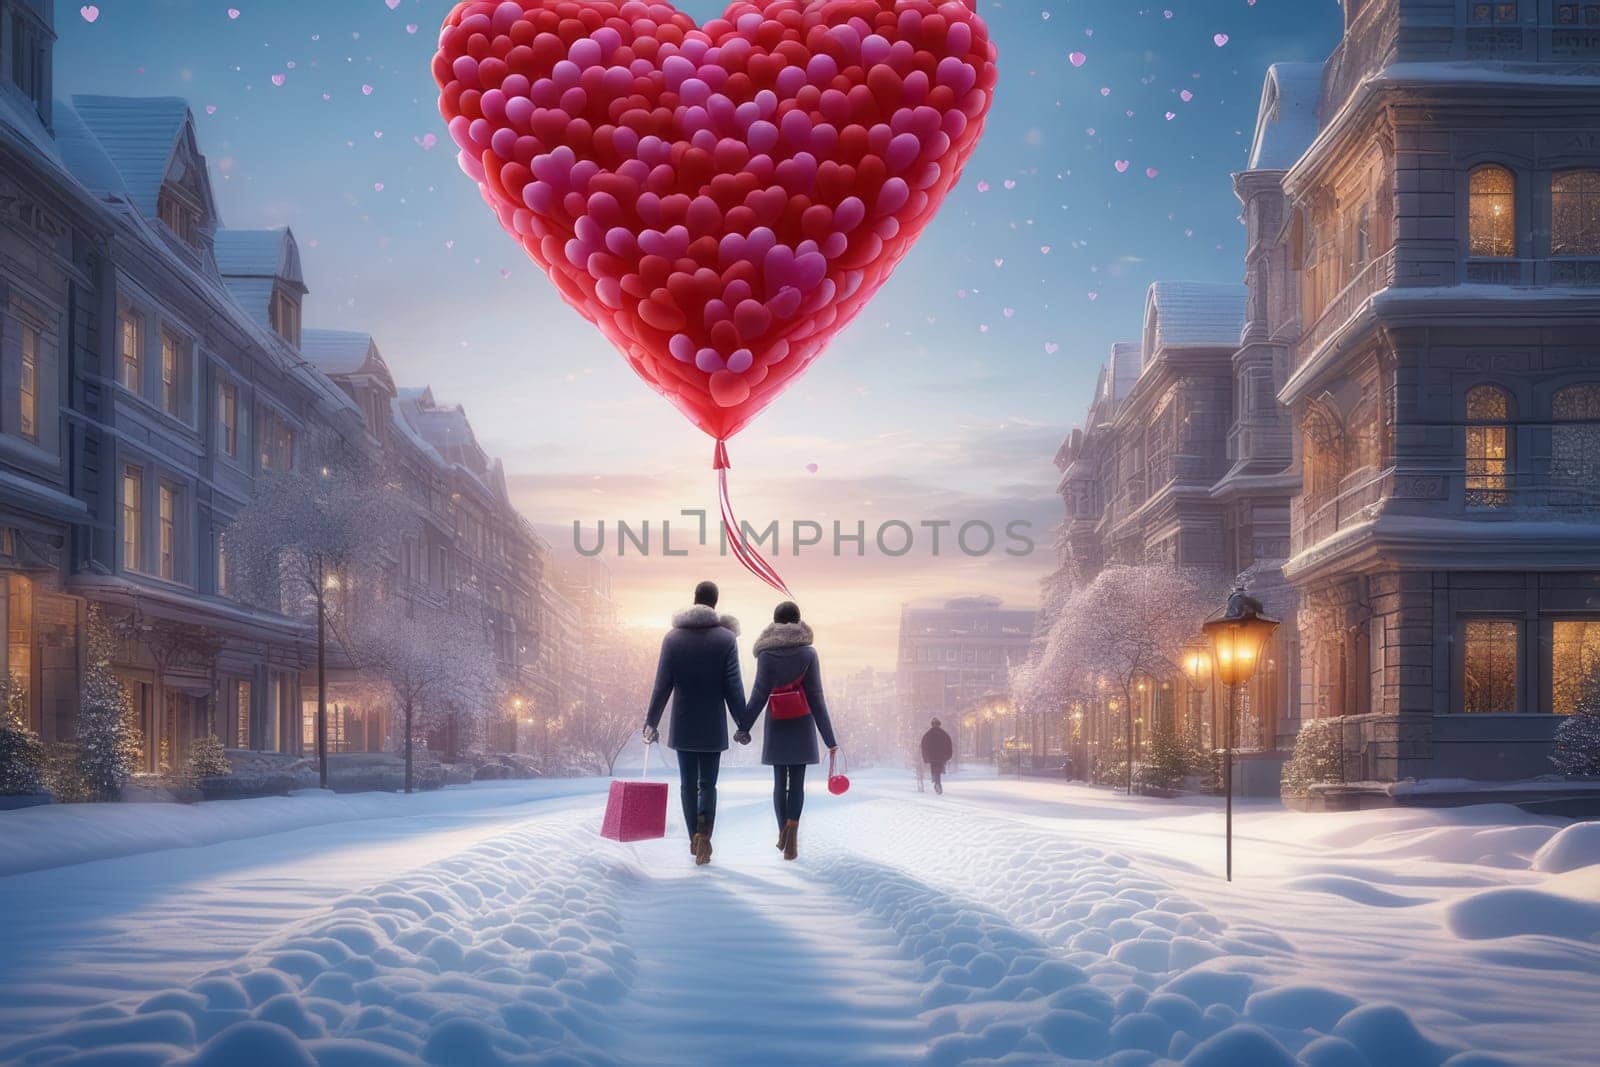 A couple walks through a snow-covered city with a heart-shaped balloon, rear view. The concept of celebrating Valentine's Day